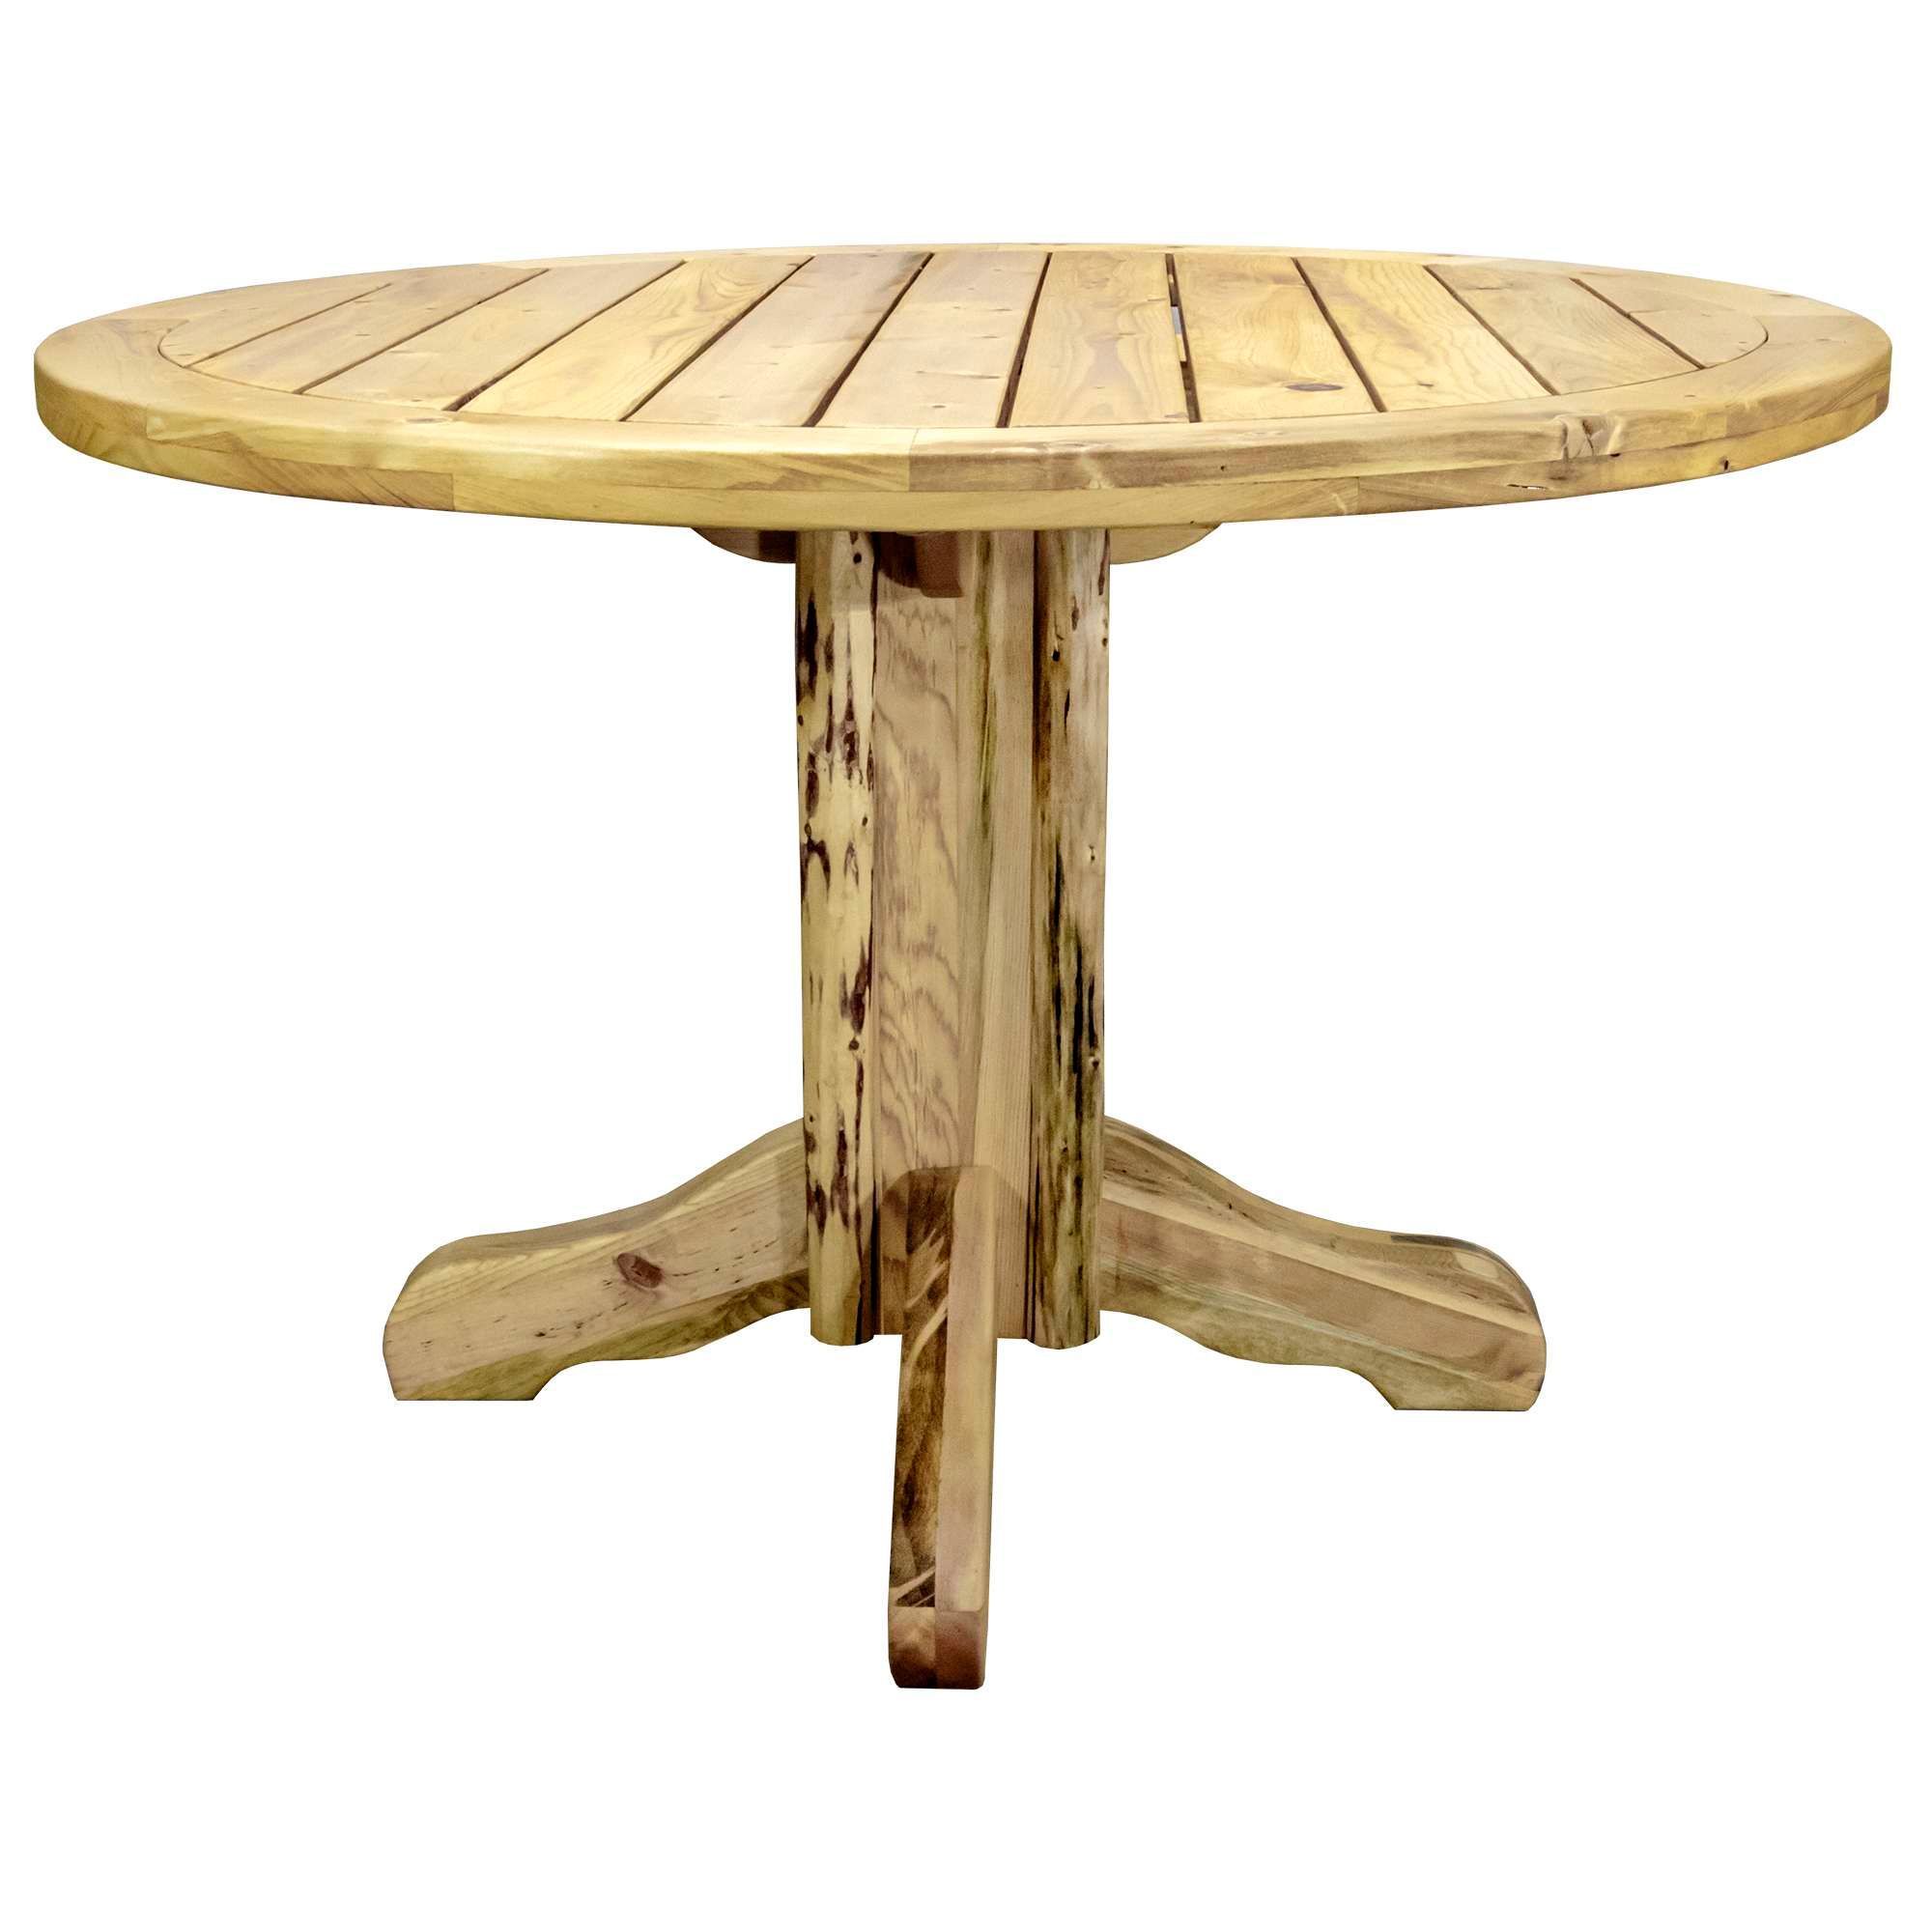 Montana Collection Patio Table, Exterior Finish - image 2 of 5